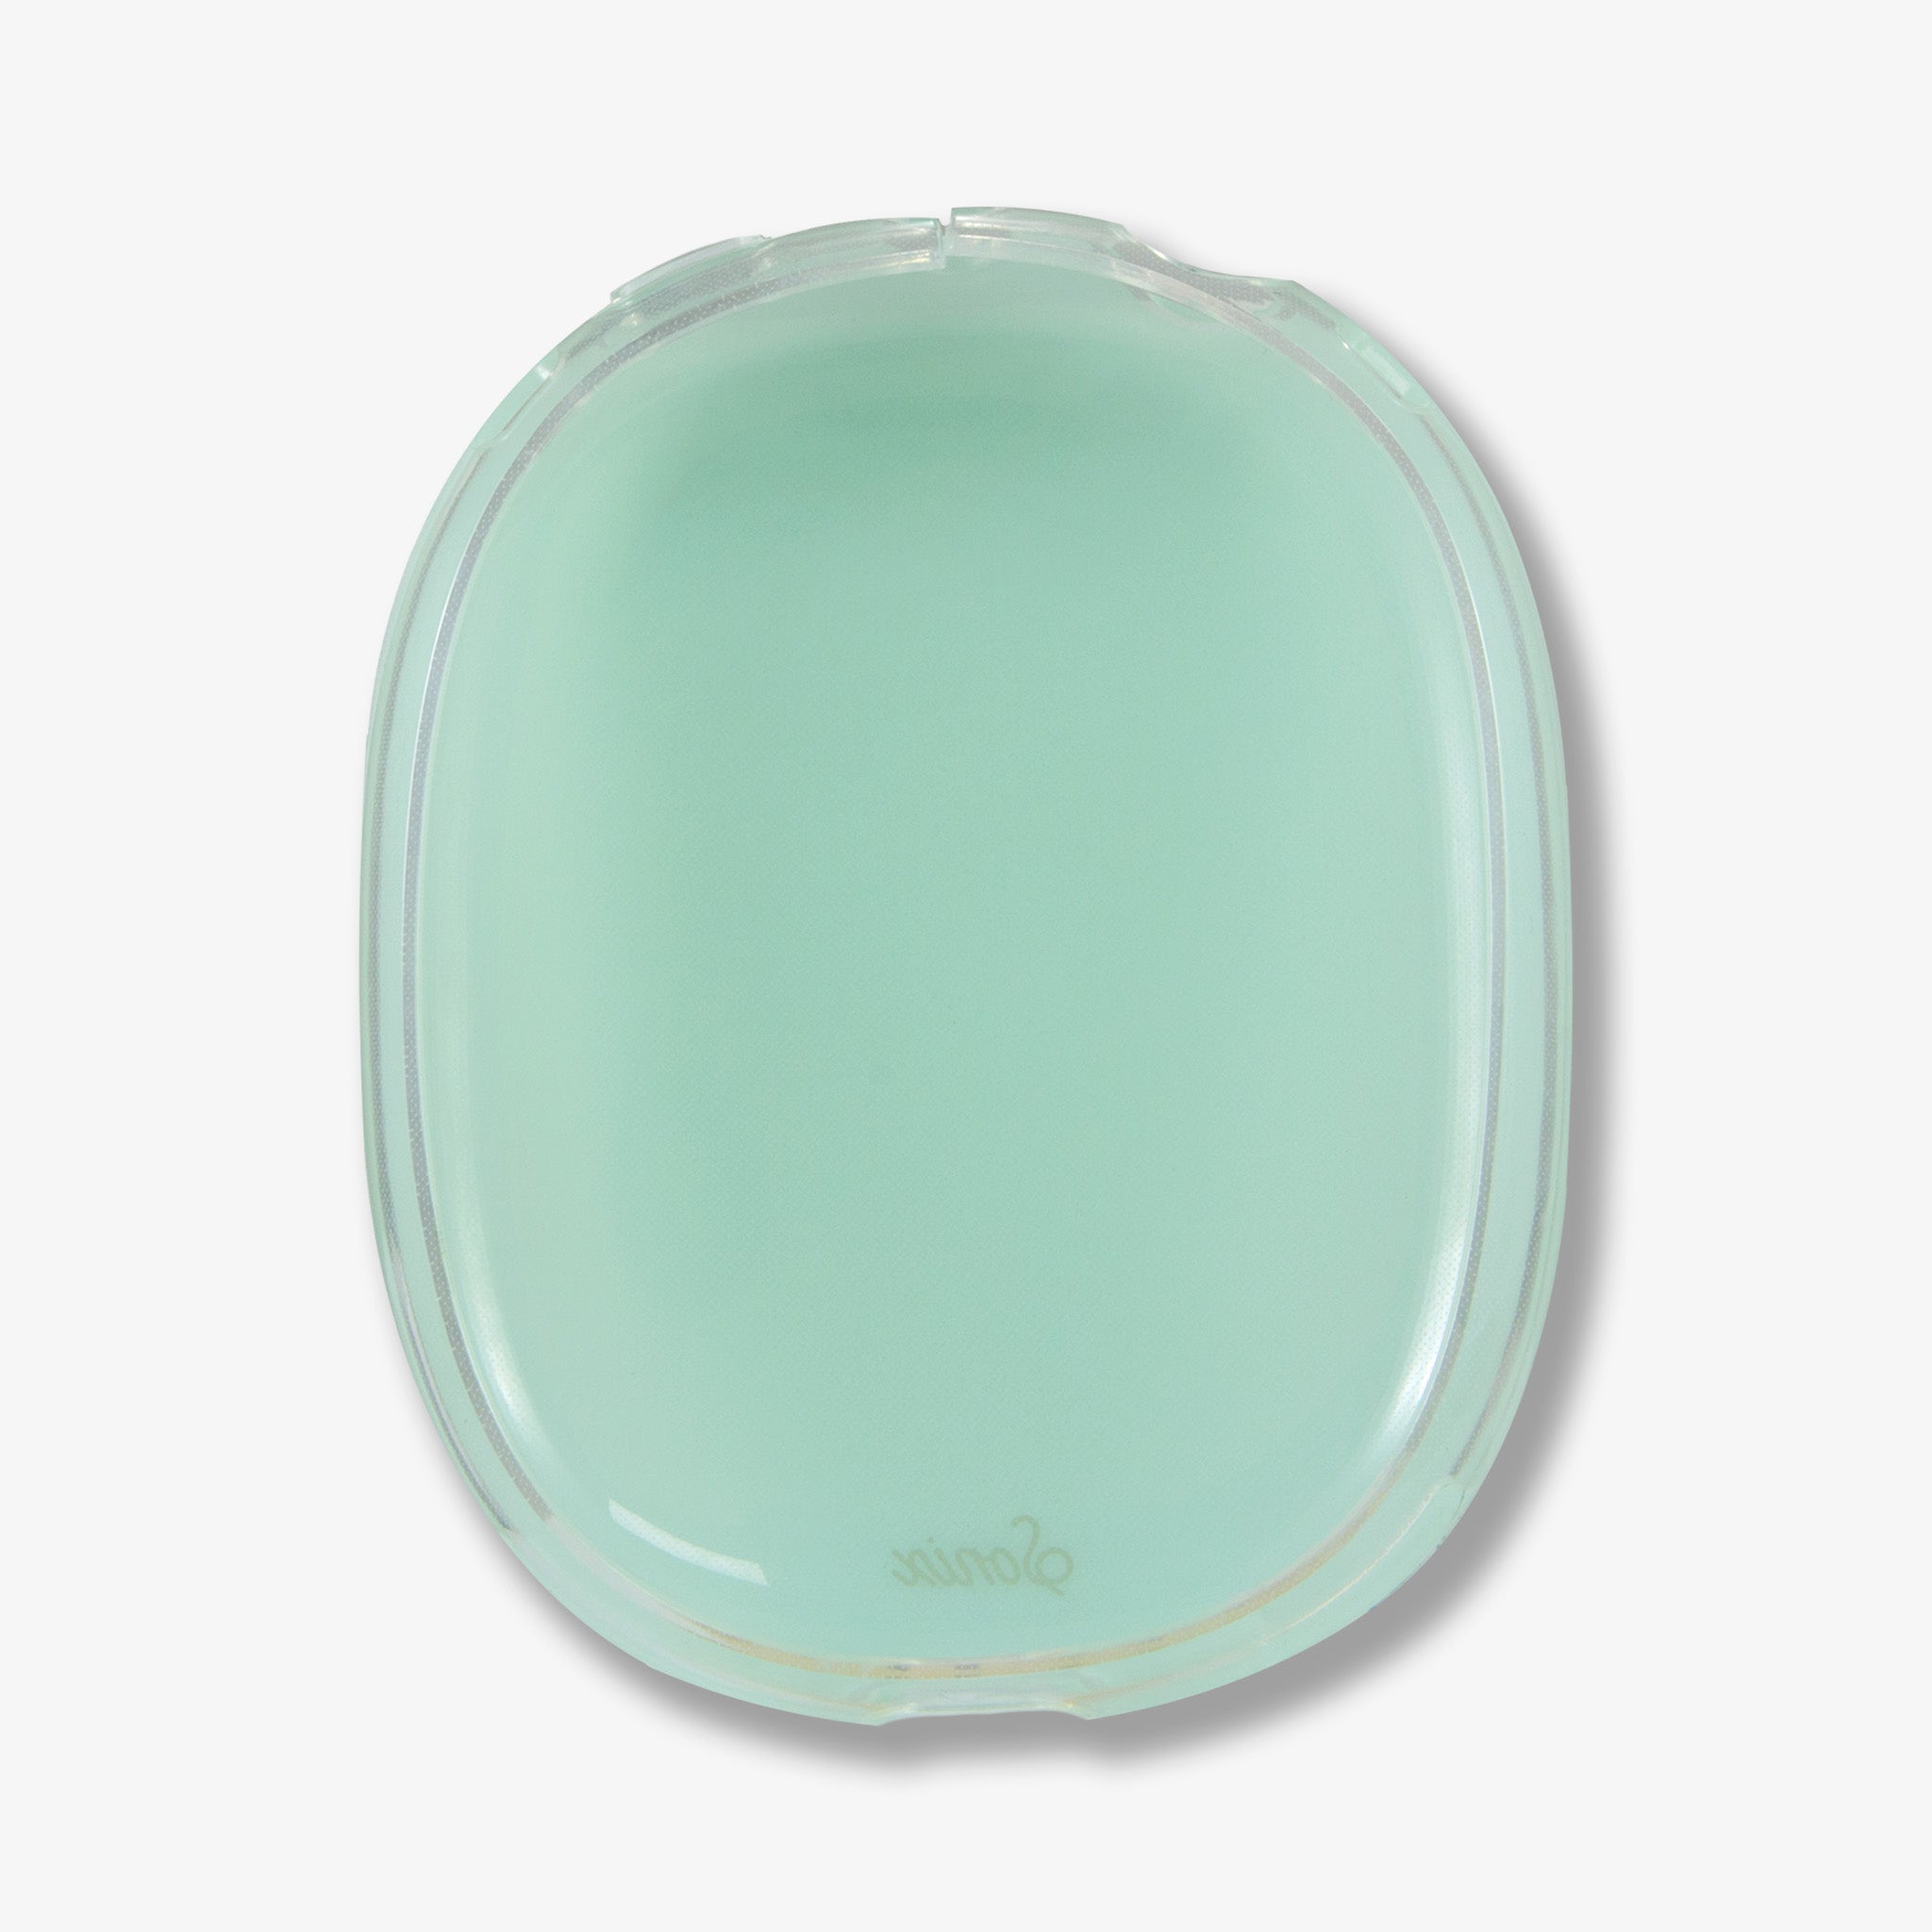 Jelly AirPods Max Cover - Mint